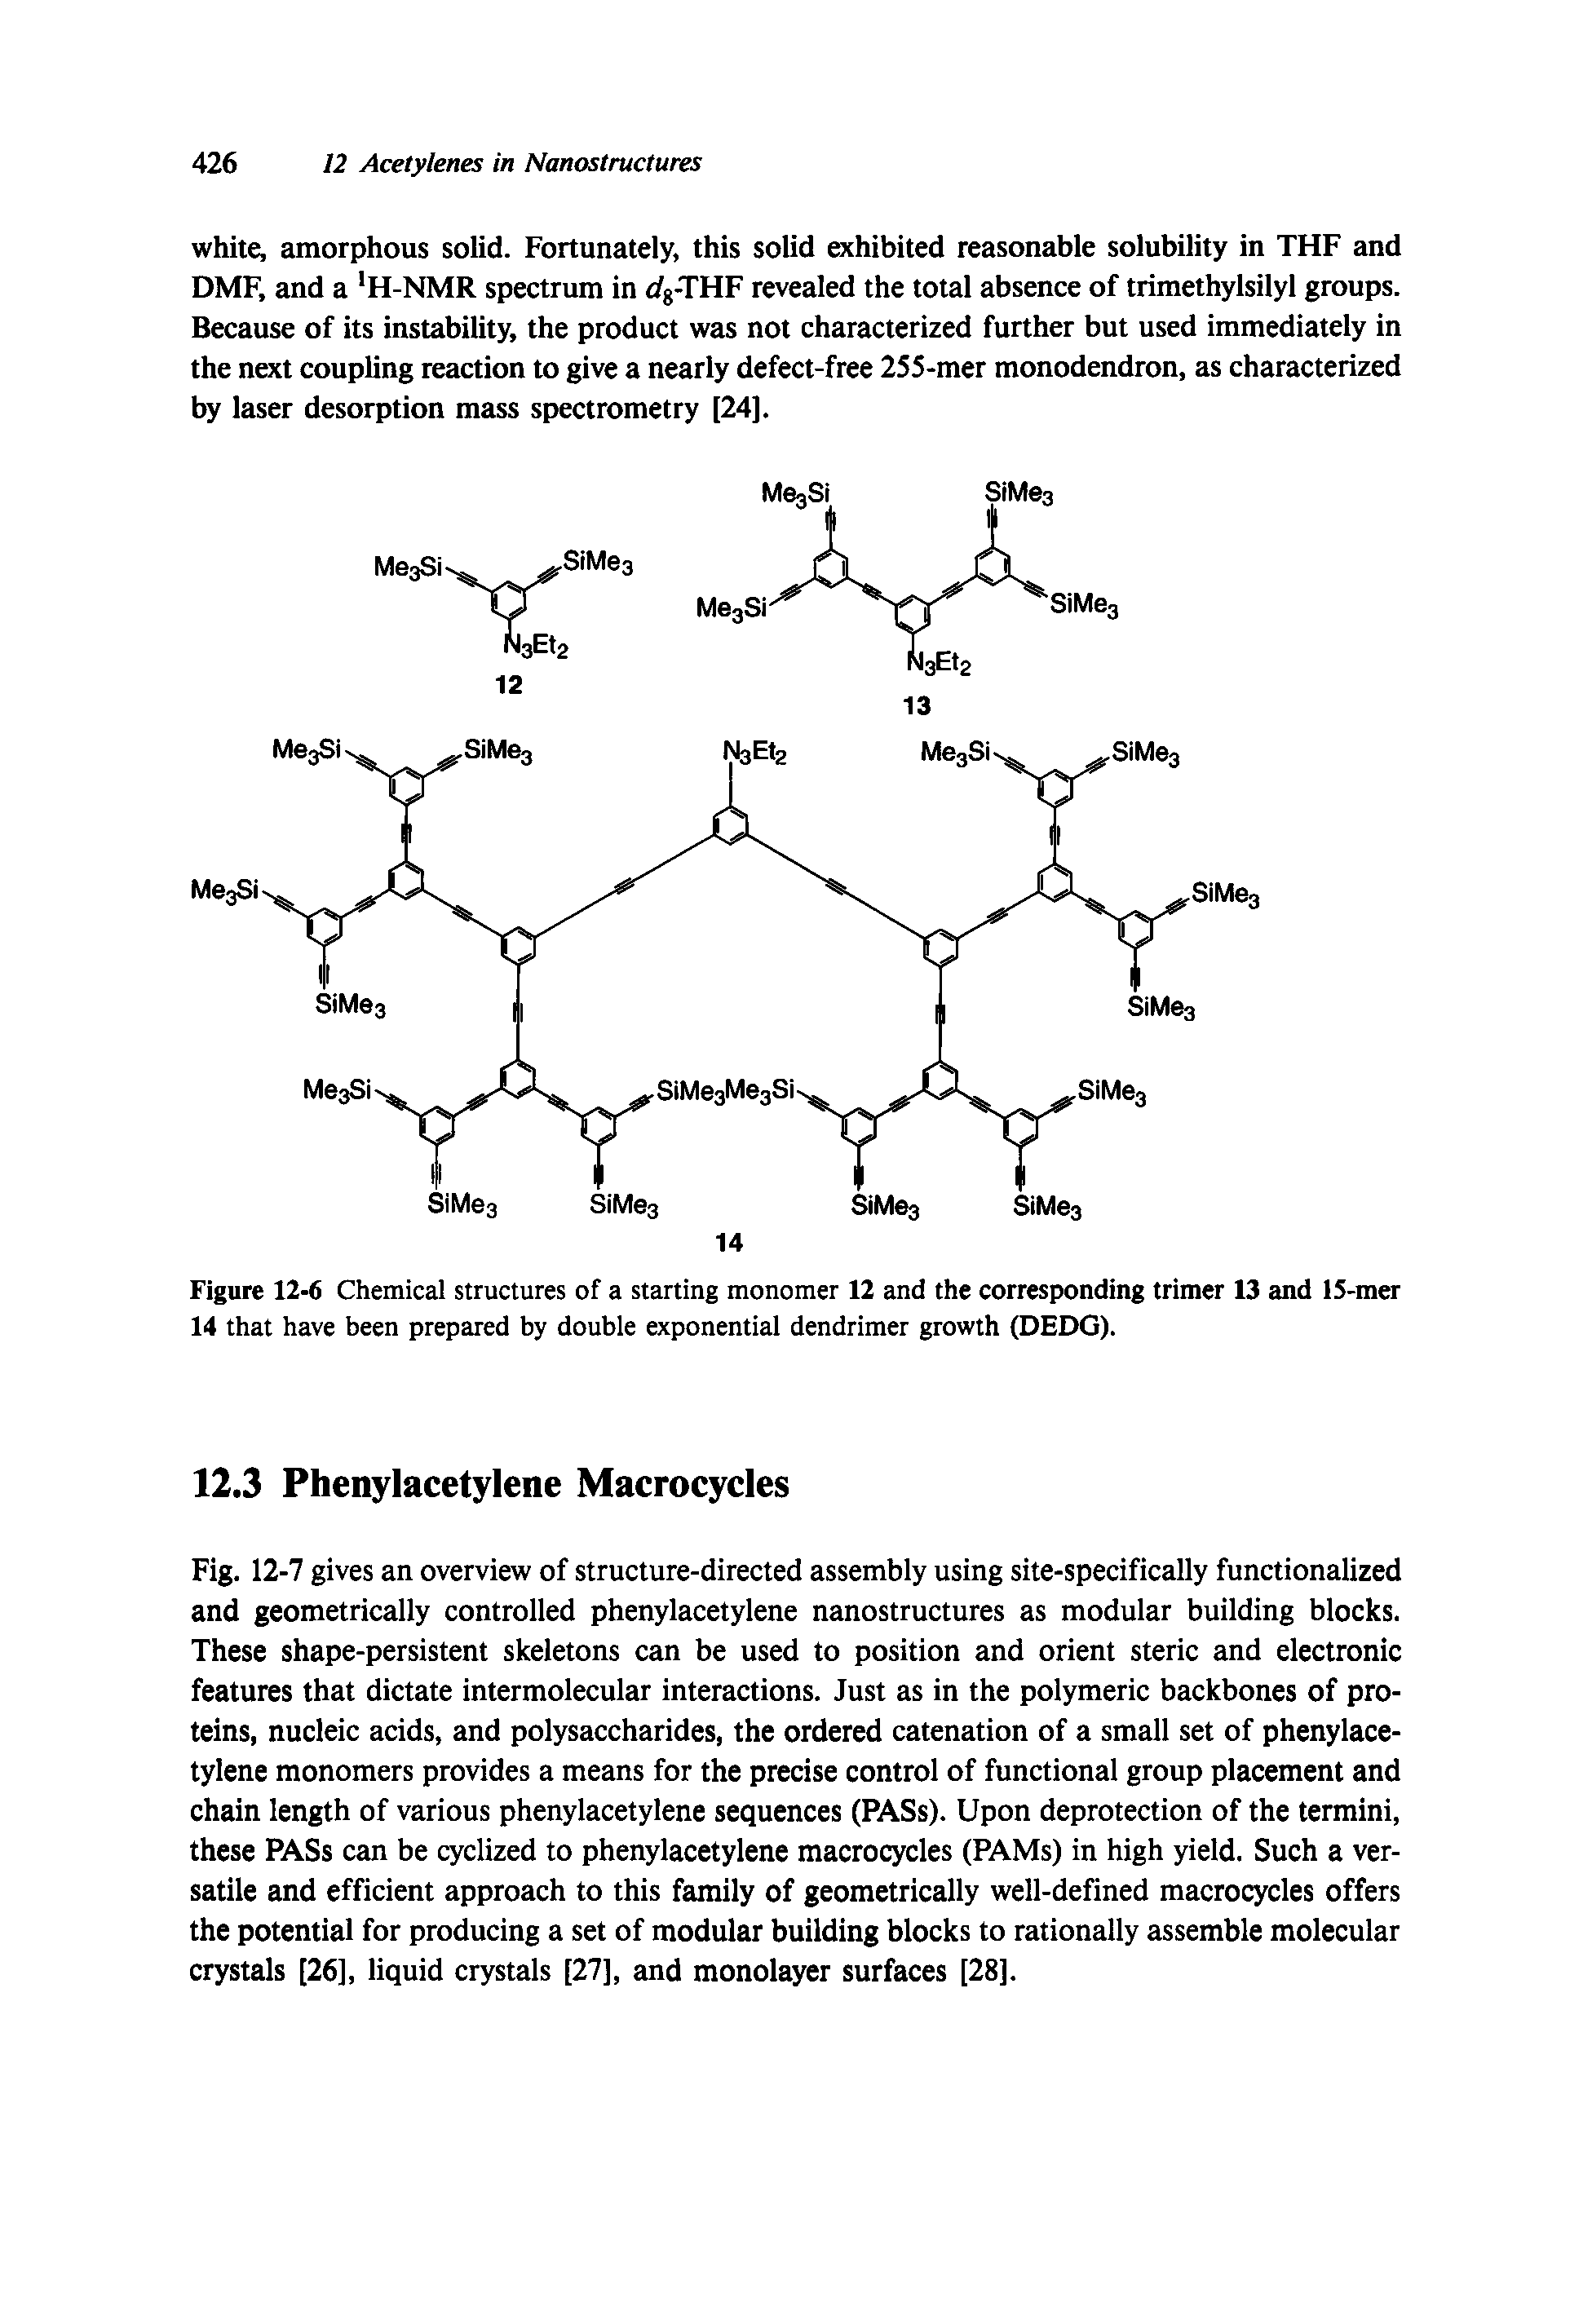 Figure 12-6 Chemical structures of a starting monomer 12 and the corresponding trimer 13 and 15-mer 14 that have been prepared by double exponential dendrimer growth (DEDG).